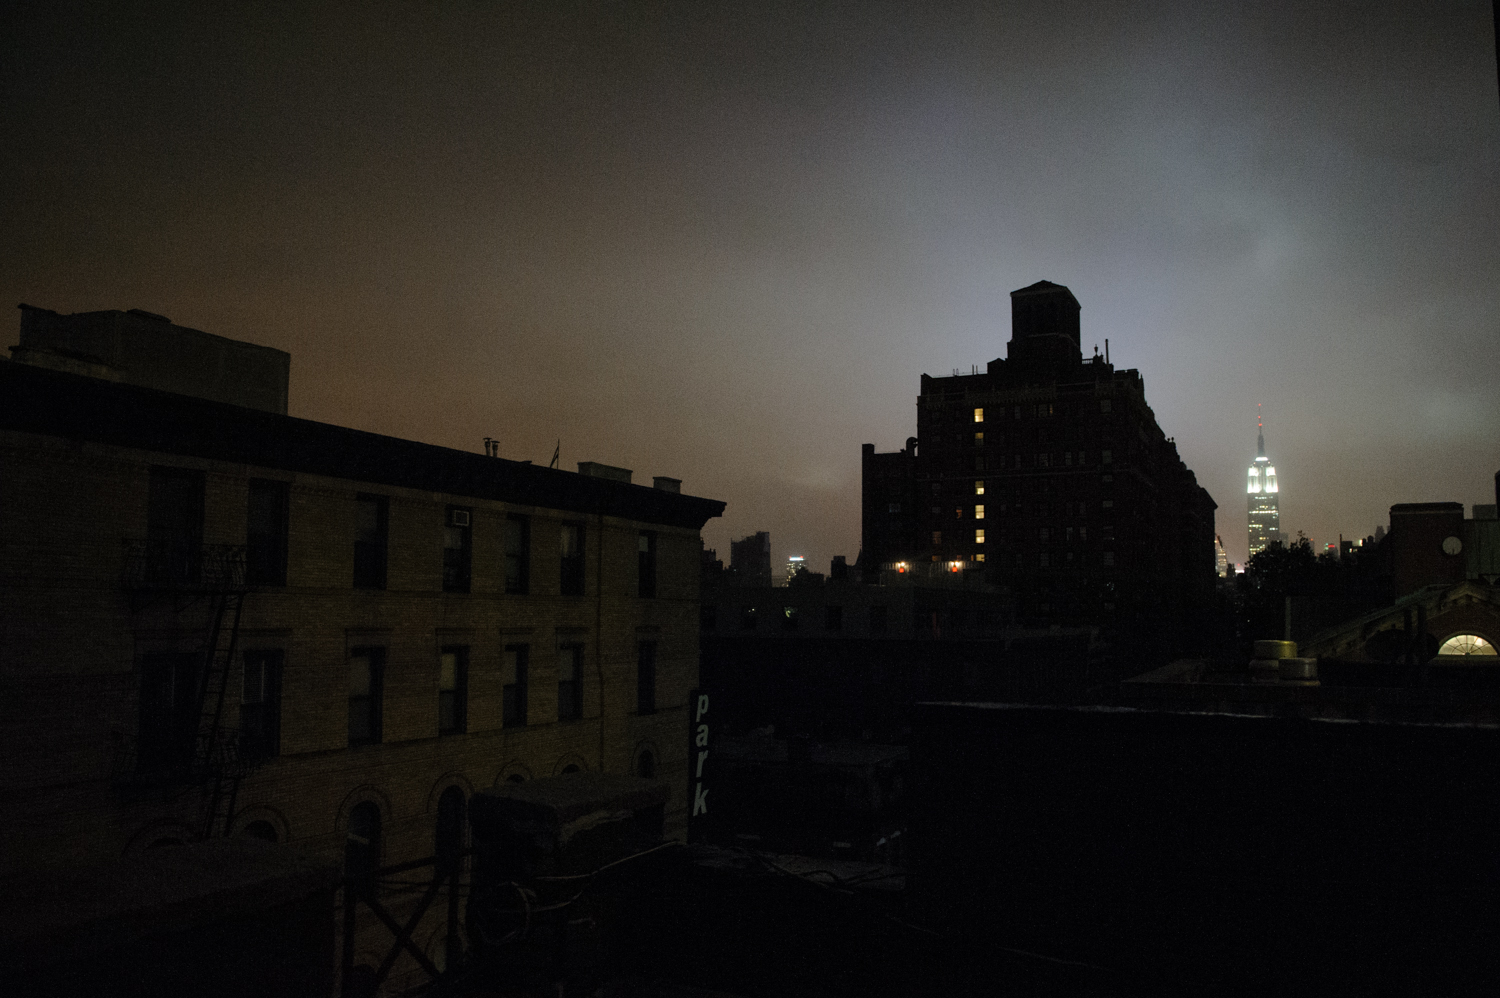 Widespread power outages have turned the city dark